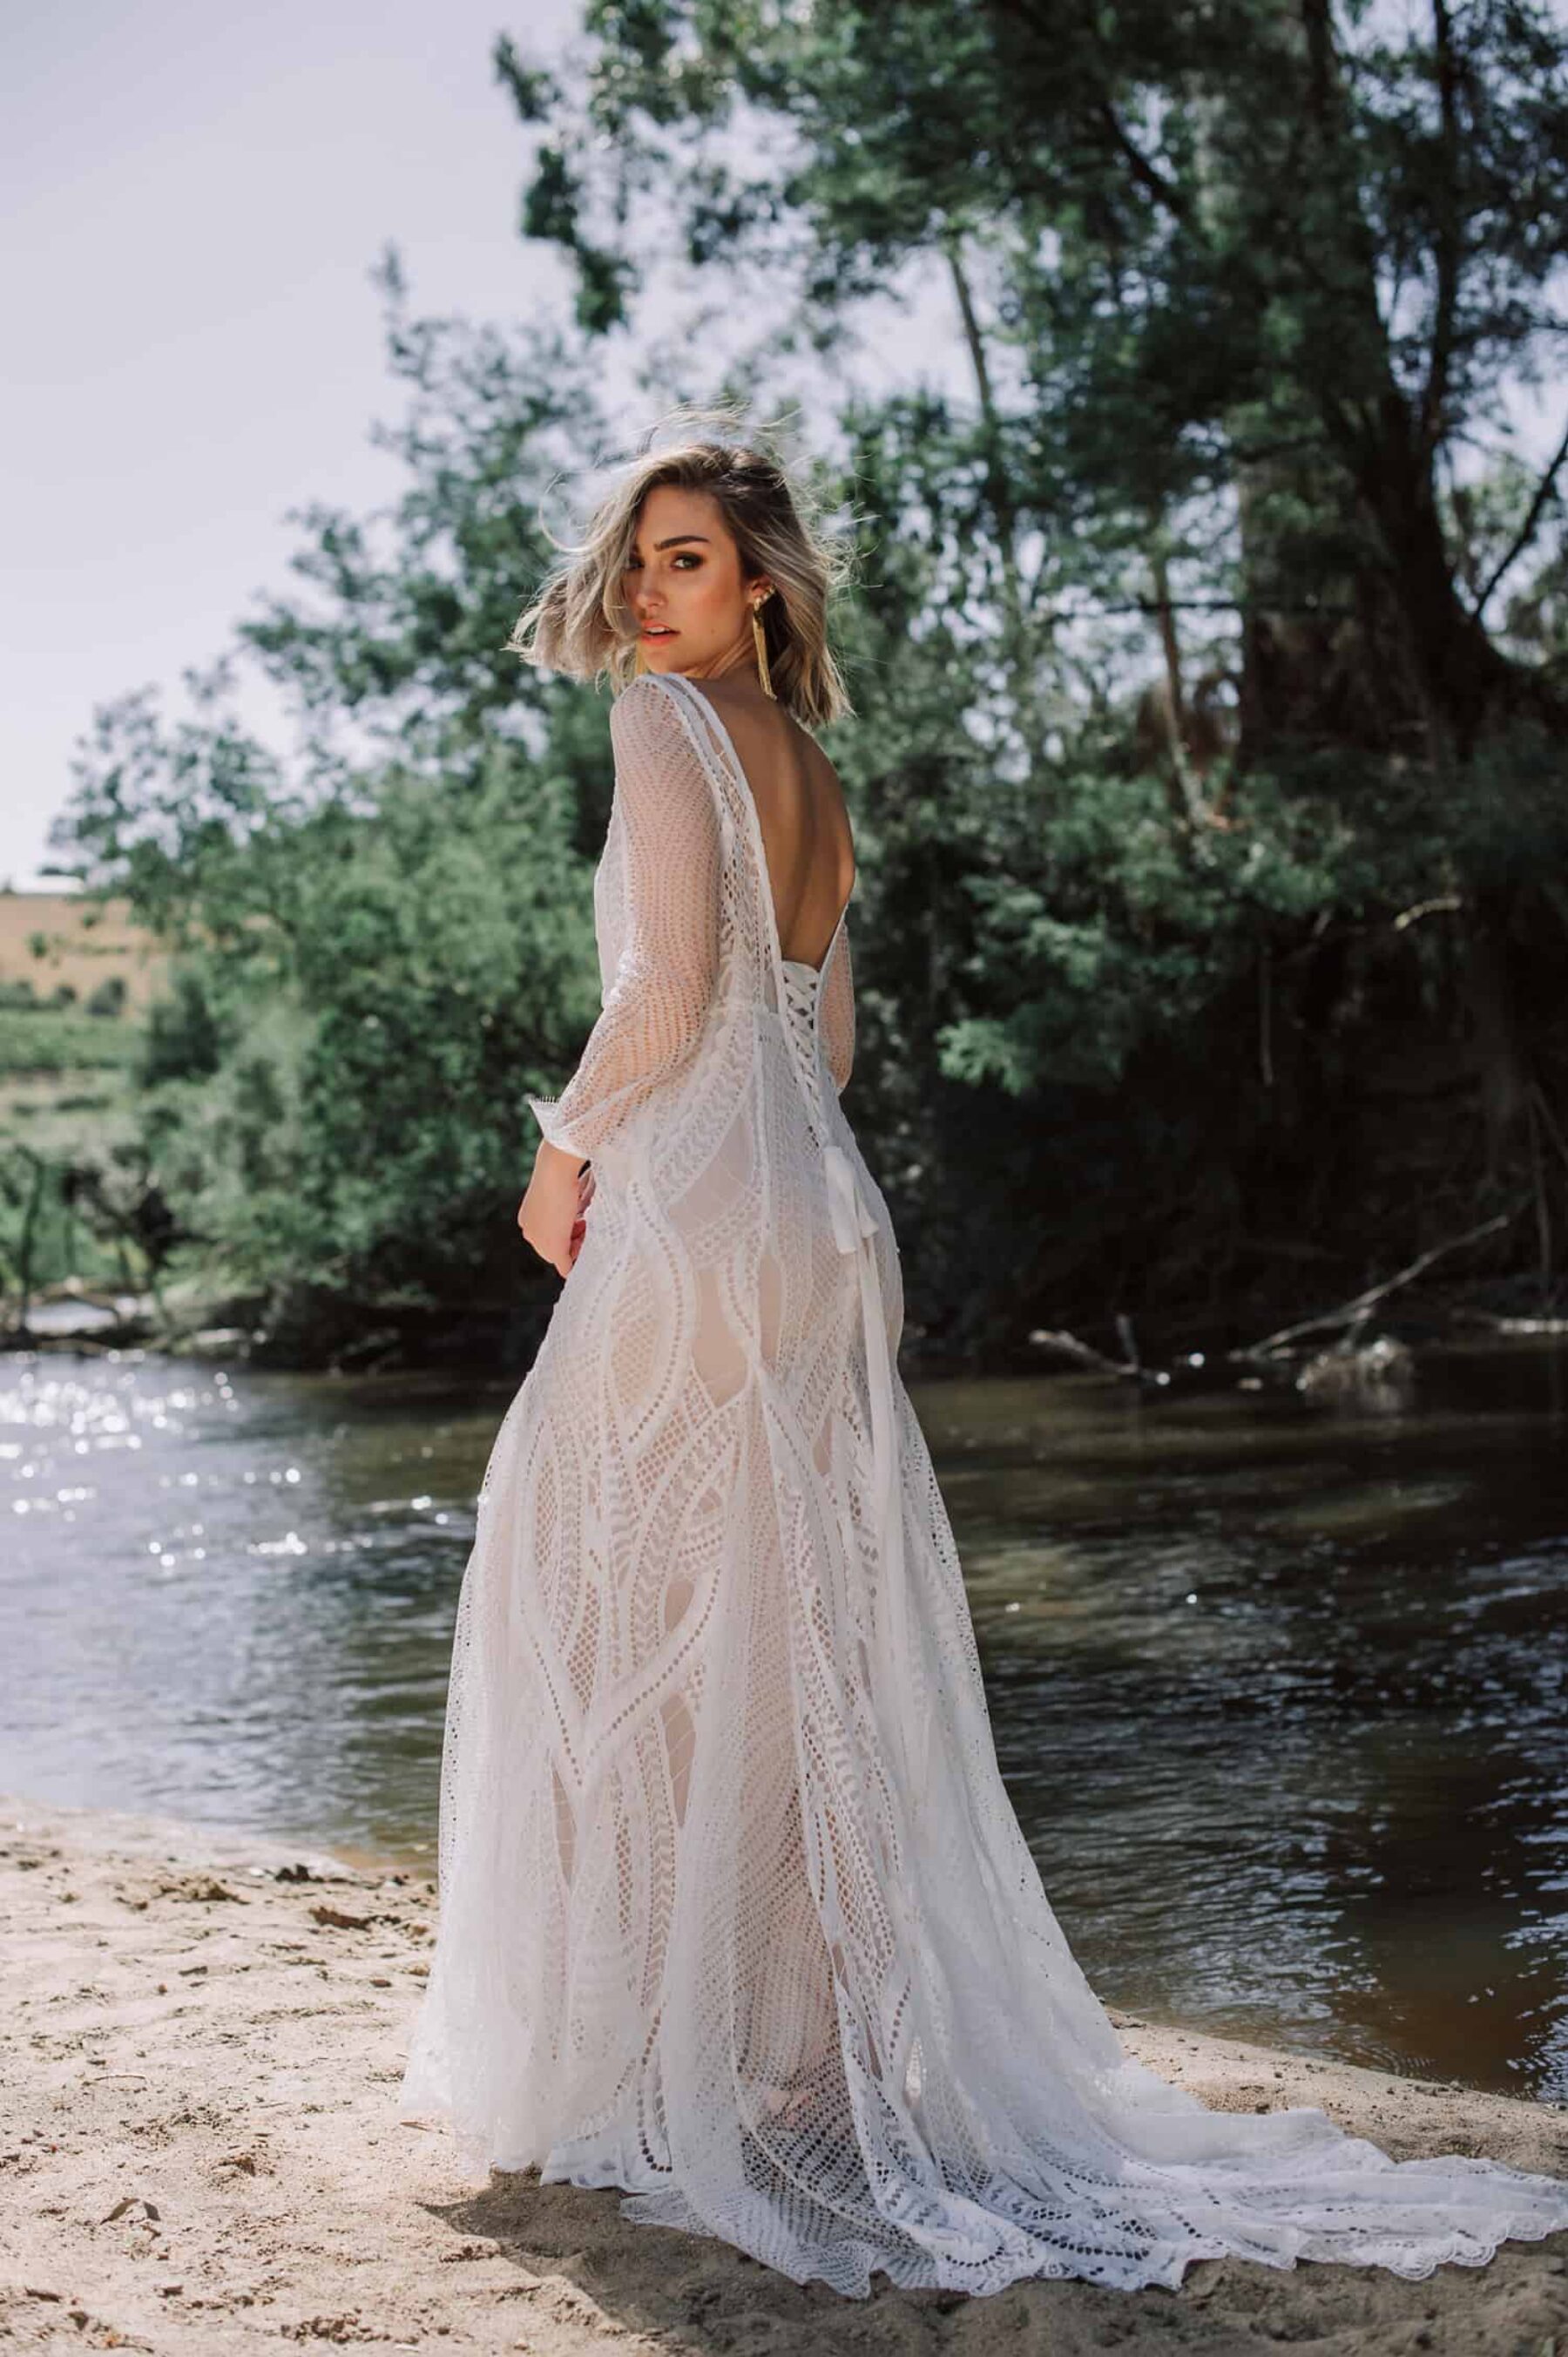 long sleeve lace wedding dress by Melbourne designer Cathleen Jia